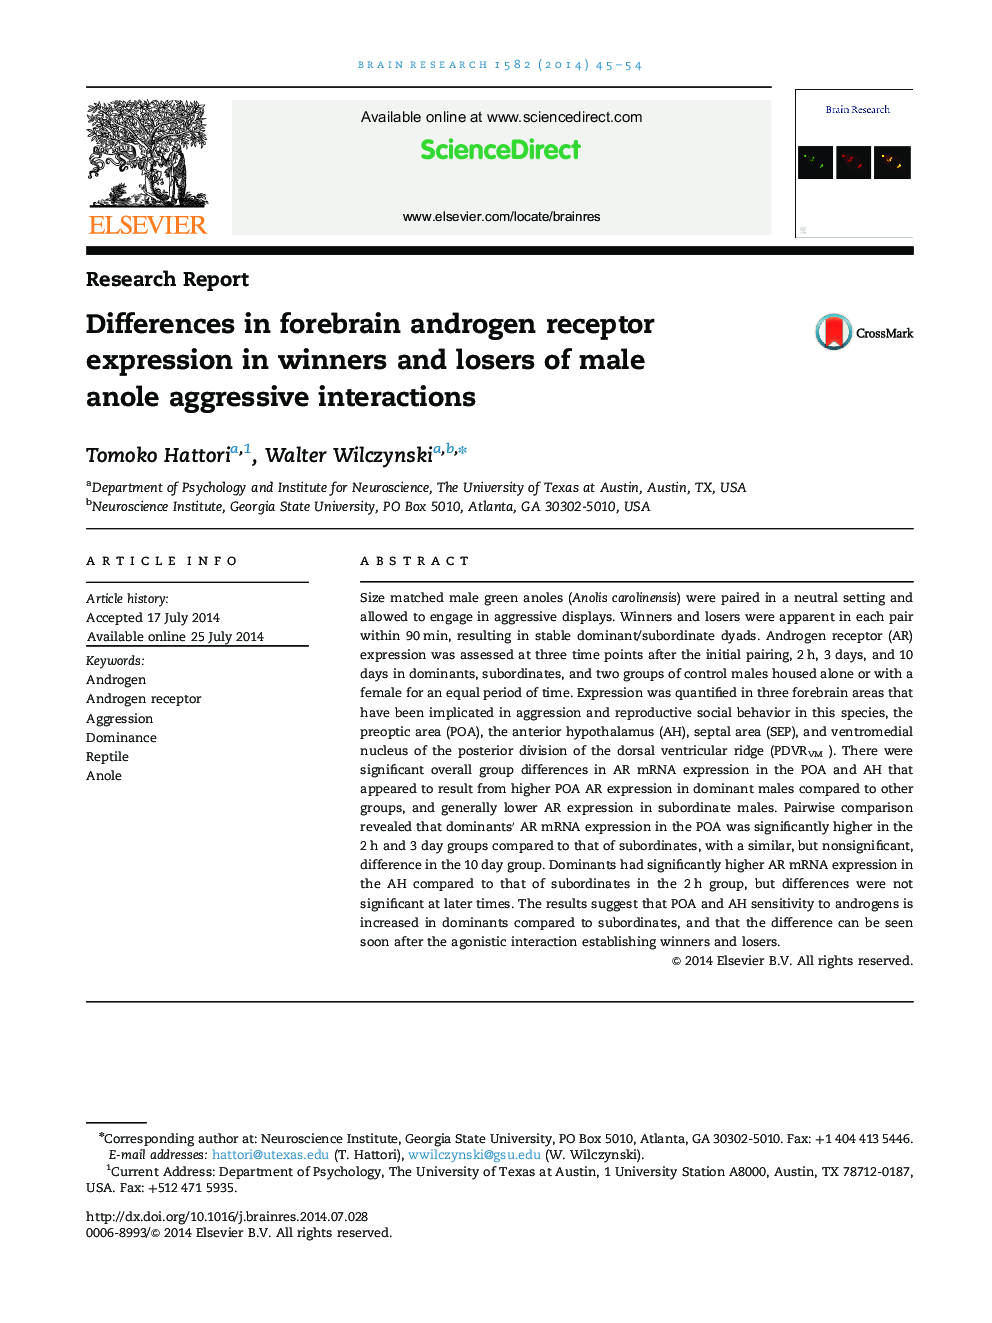 Differences in forebrain androgen receptor expression in winners and losers of male anole aggressive interactions